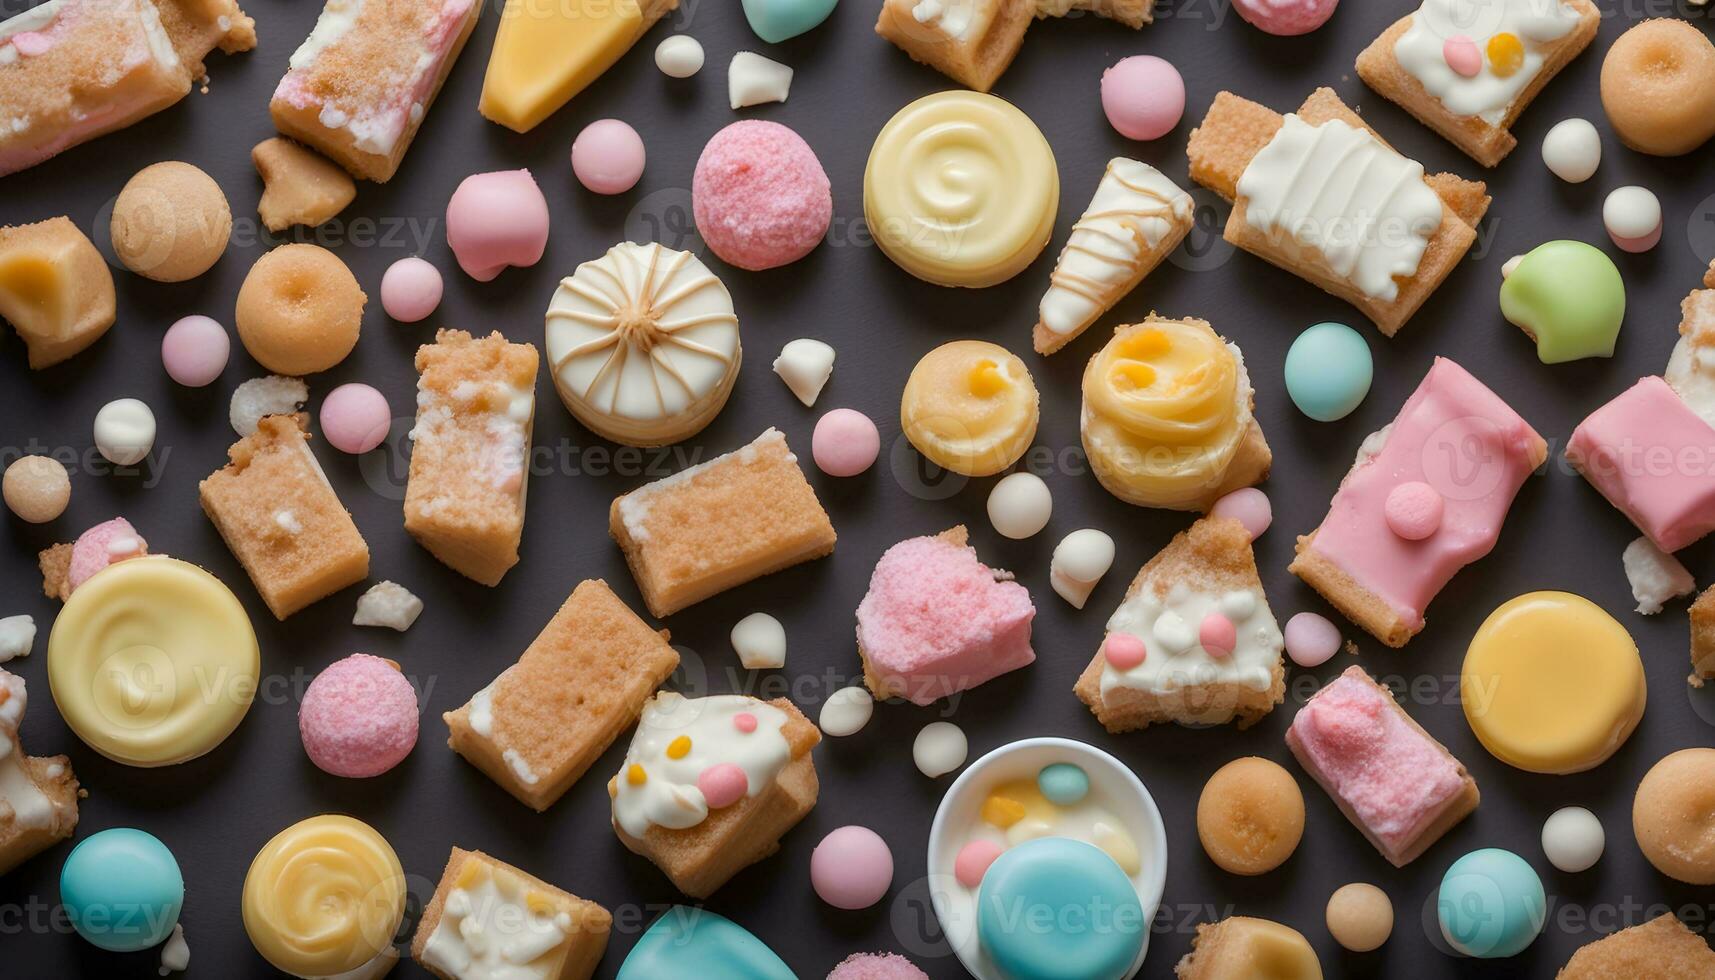 AI generated a large assortment of pastries and sweets on a black background photo